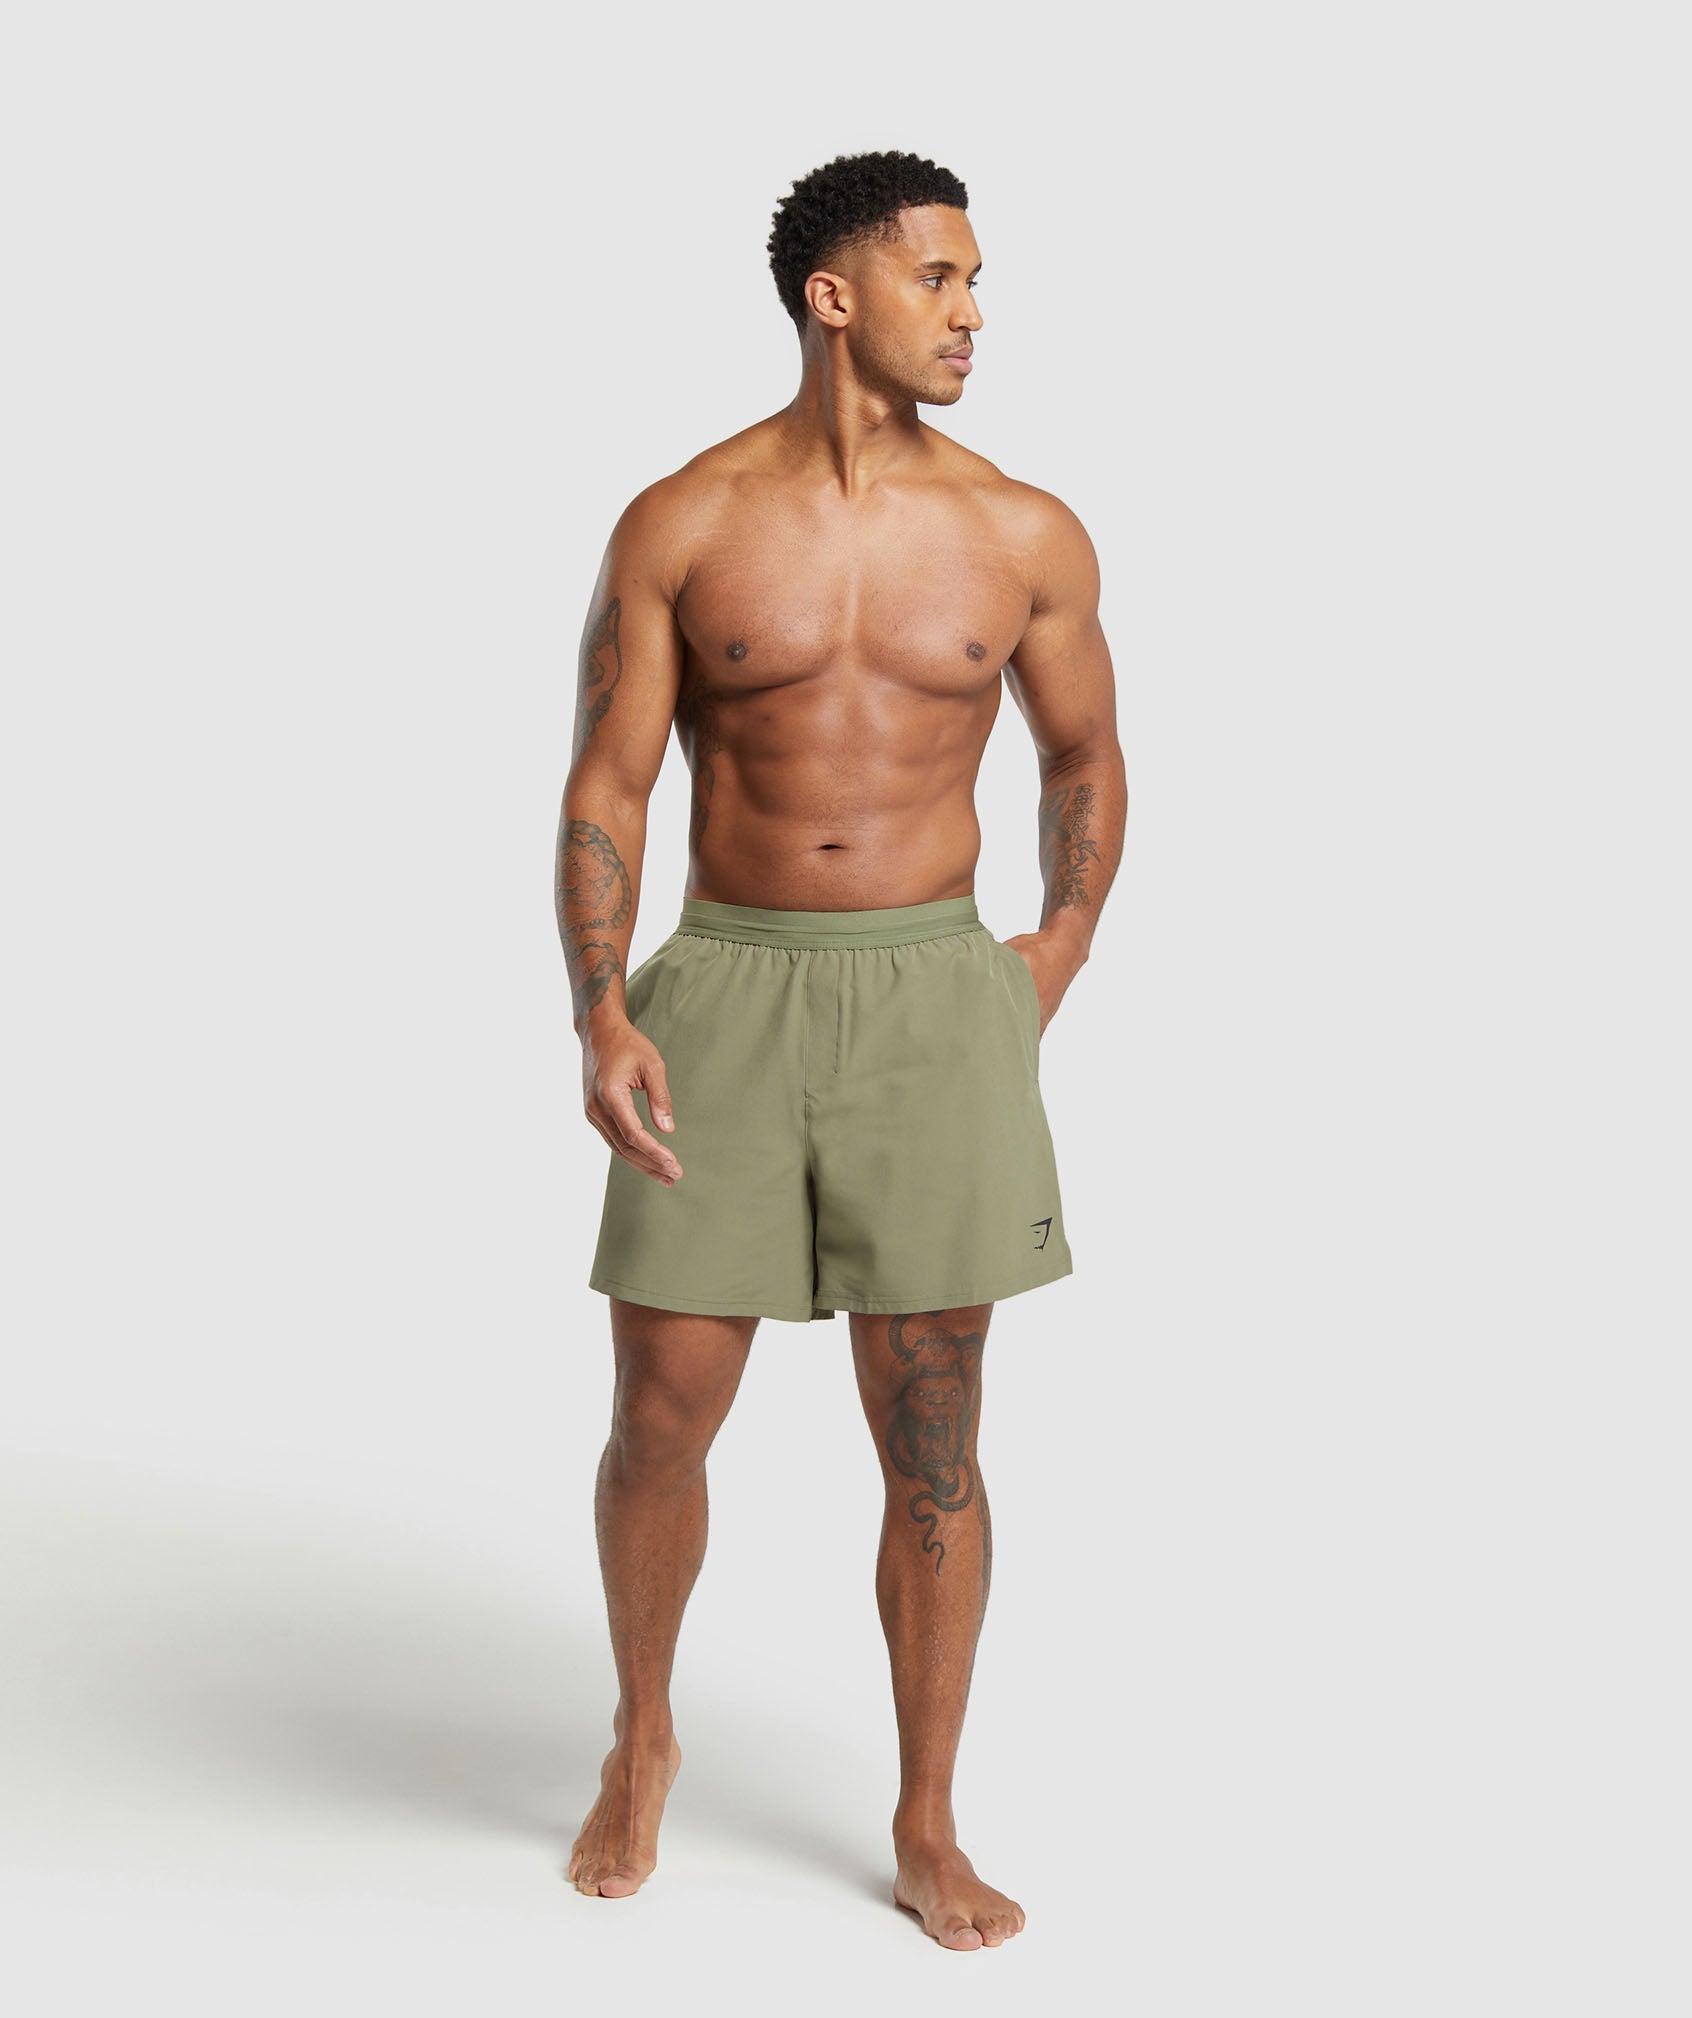 Land to Water 6" Shorts in Utility Green - view 4